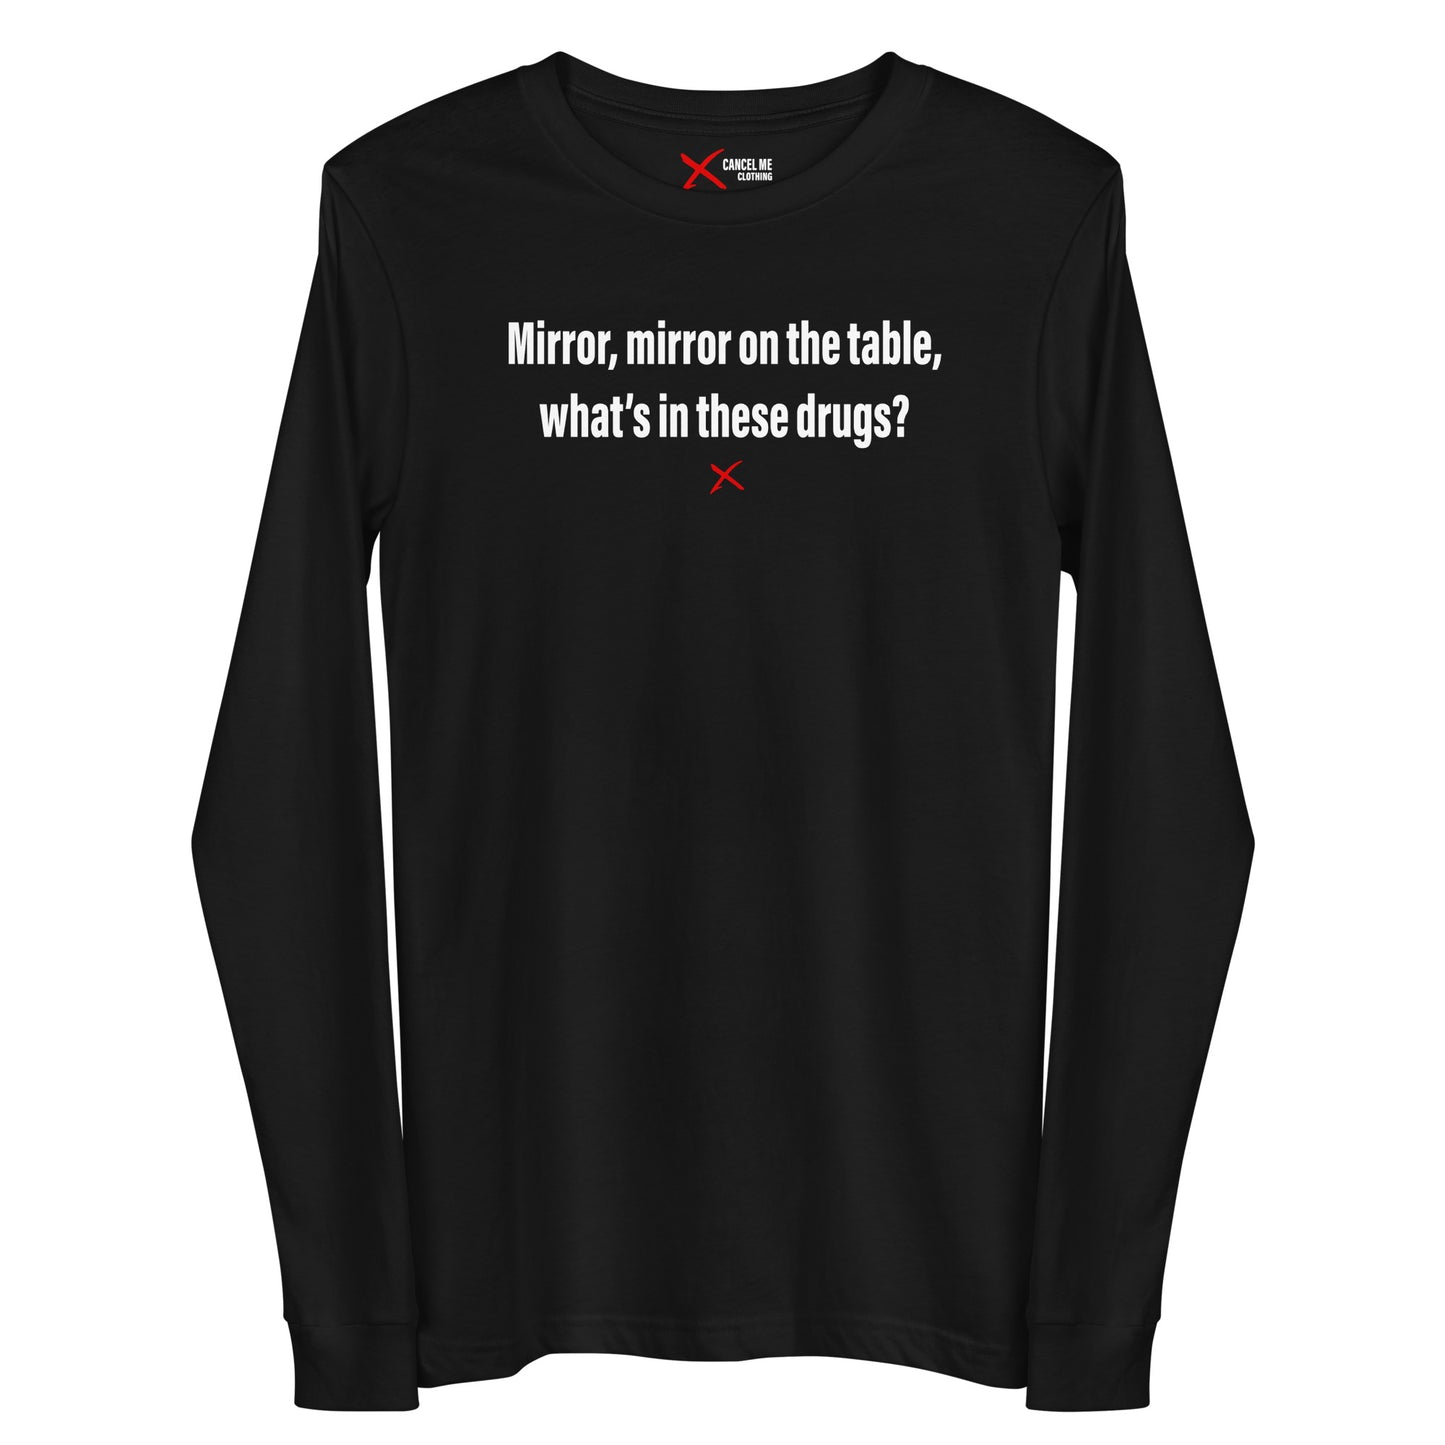 Mirror, mirror on the table, what's in these drugs? - Longsleeve